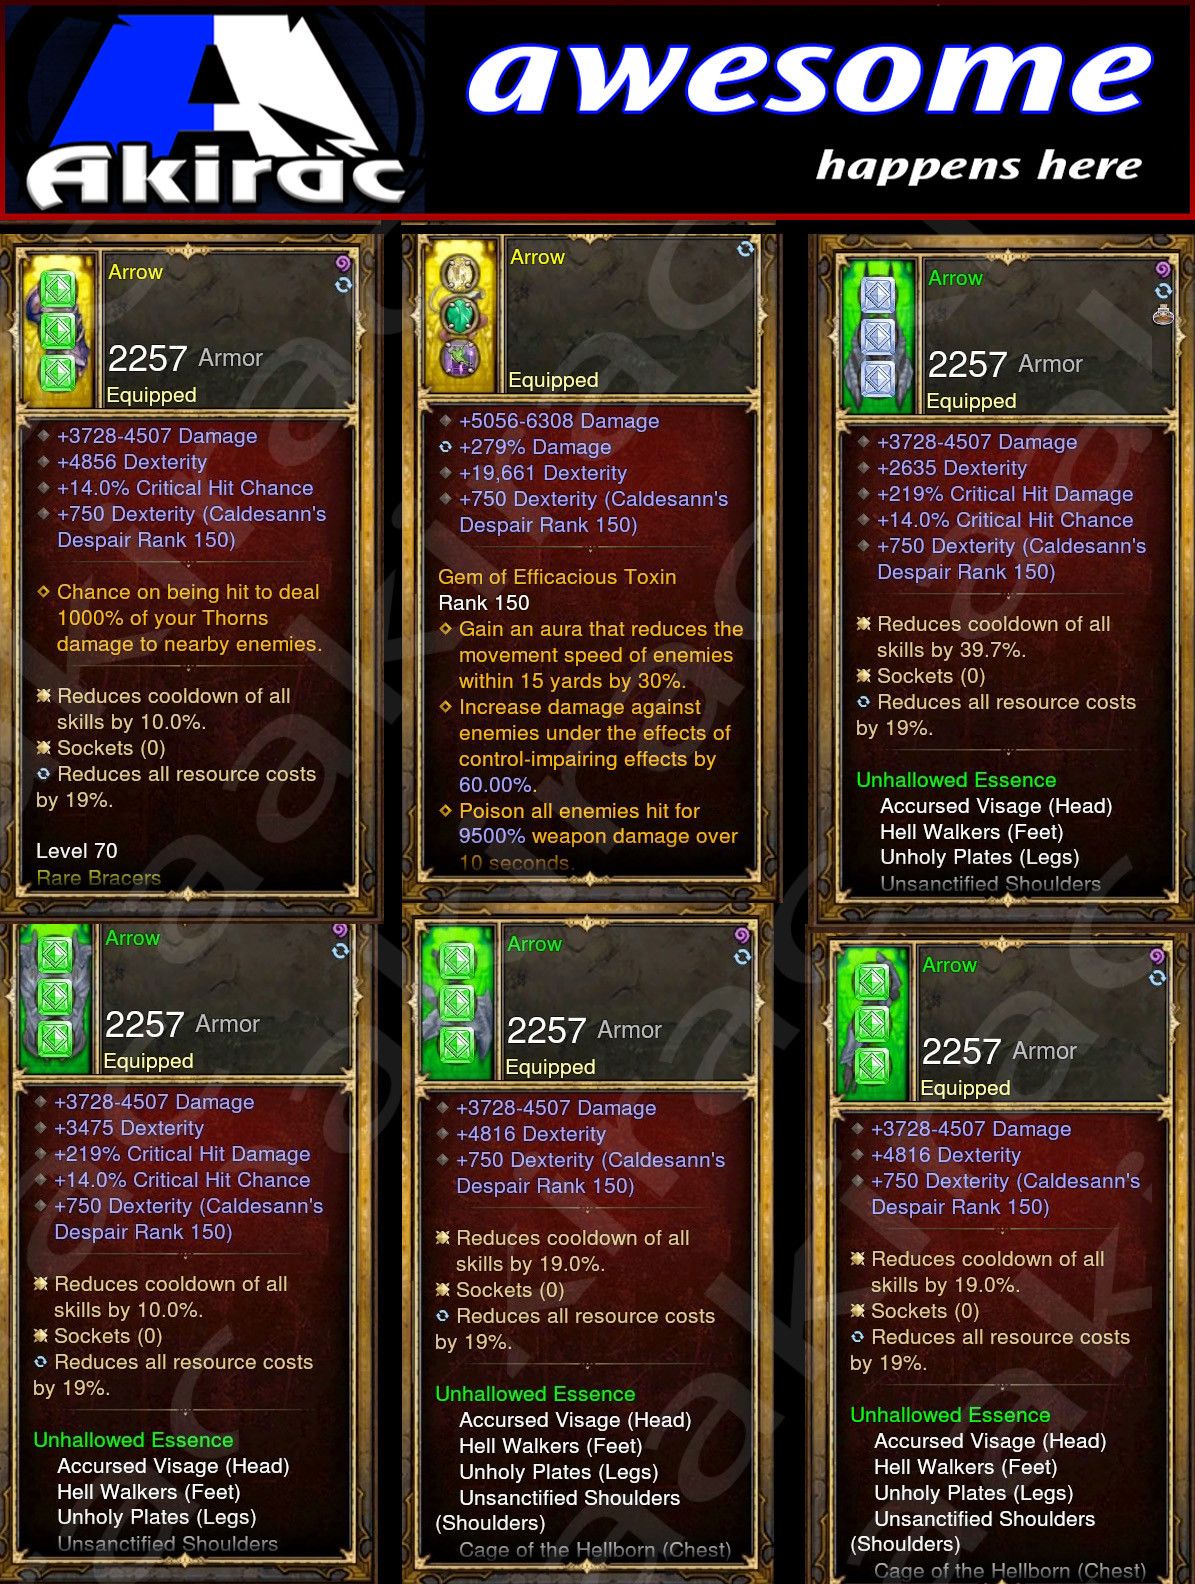 Diablo 3 Immortal v1 Unhallow Demon Hunter Modded Set for Rift 150 Arrow Diablo 3 Mods ROS Seasonal and Non Seasonal Save Mod - Modded Items and Gear - Hacks - Cheats - Trainers for Playstation 4 - Playstation 5 - Nintendo Switch - Xbox One